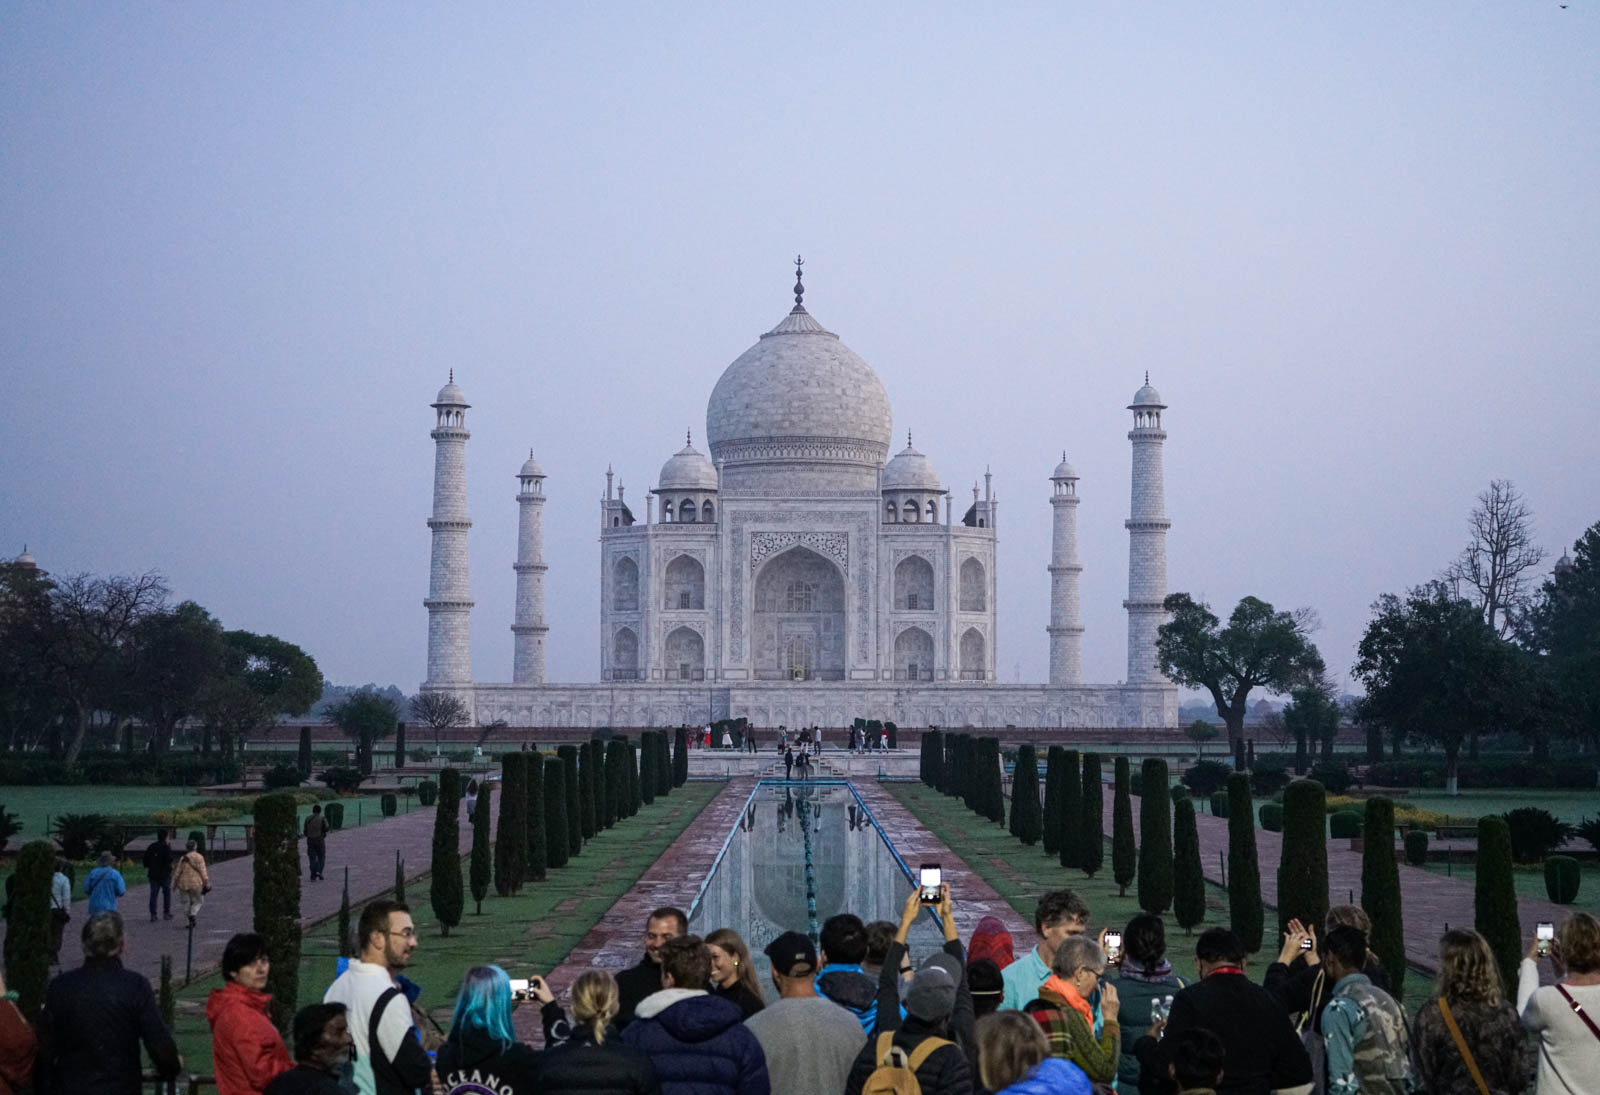 Everybody wants the perfect picture of the Taj Mahal